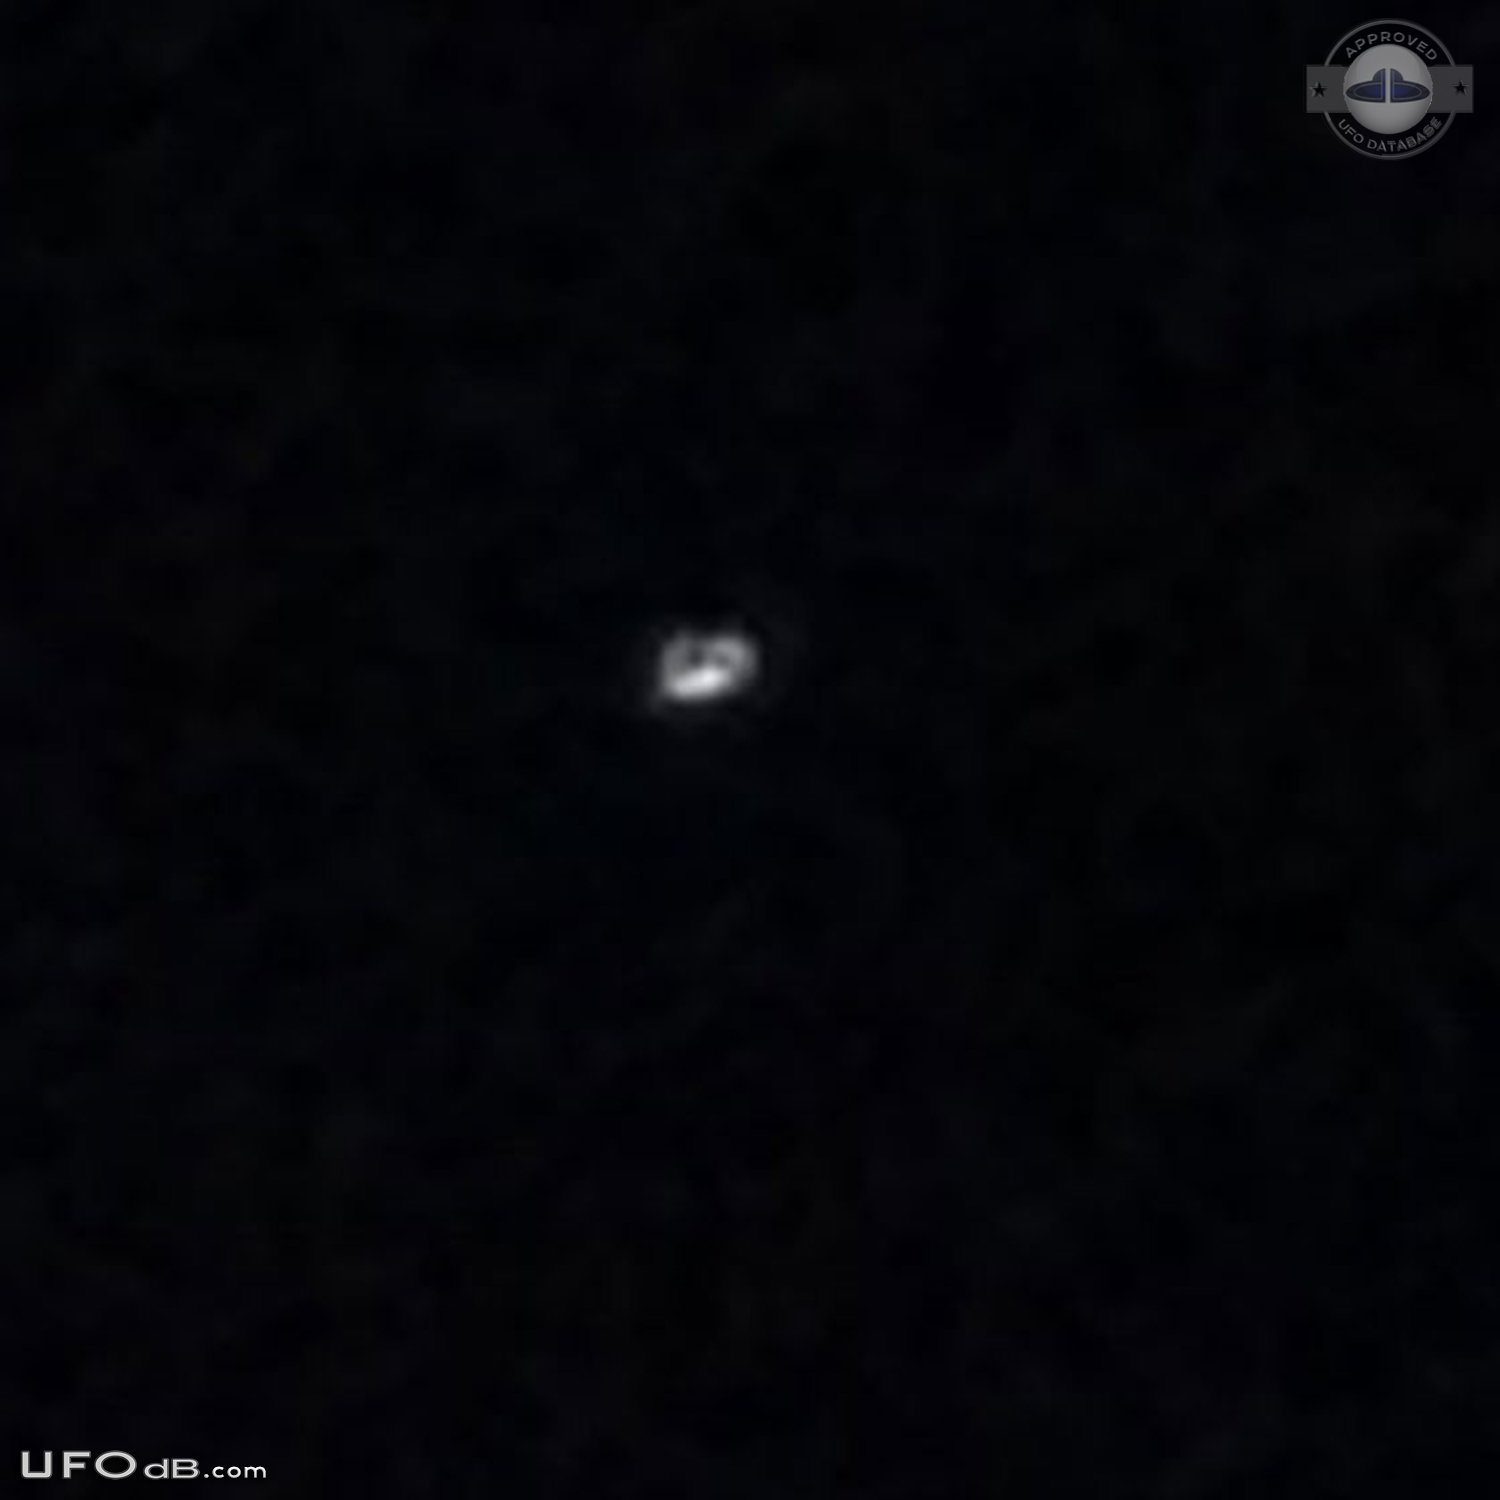 UFO with tentacles with reddish color seen over Magee, Mississipi 2014 UFO Picture #561-1